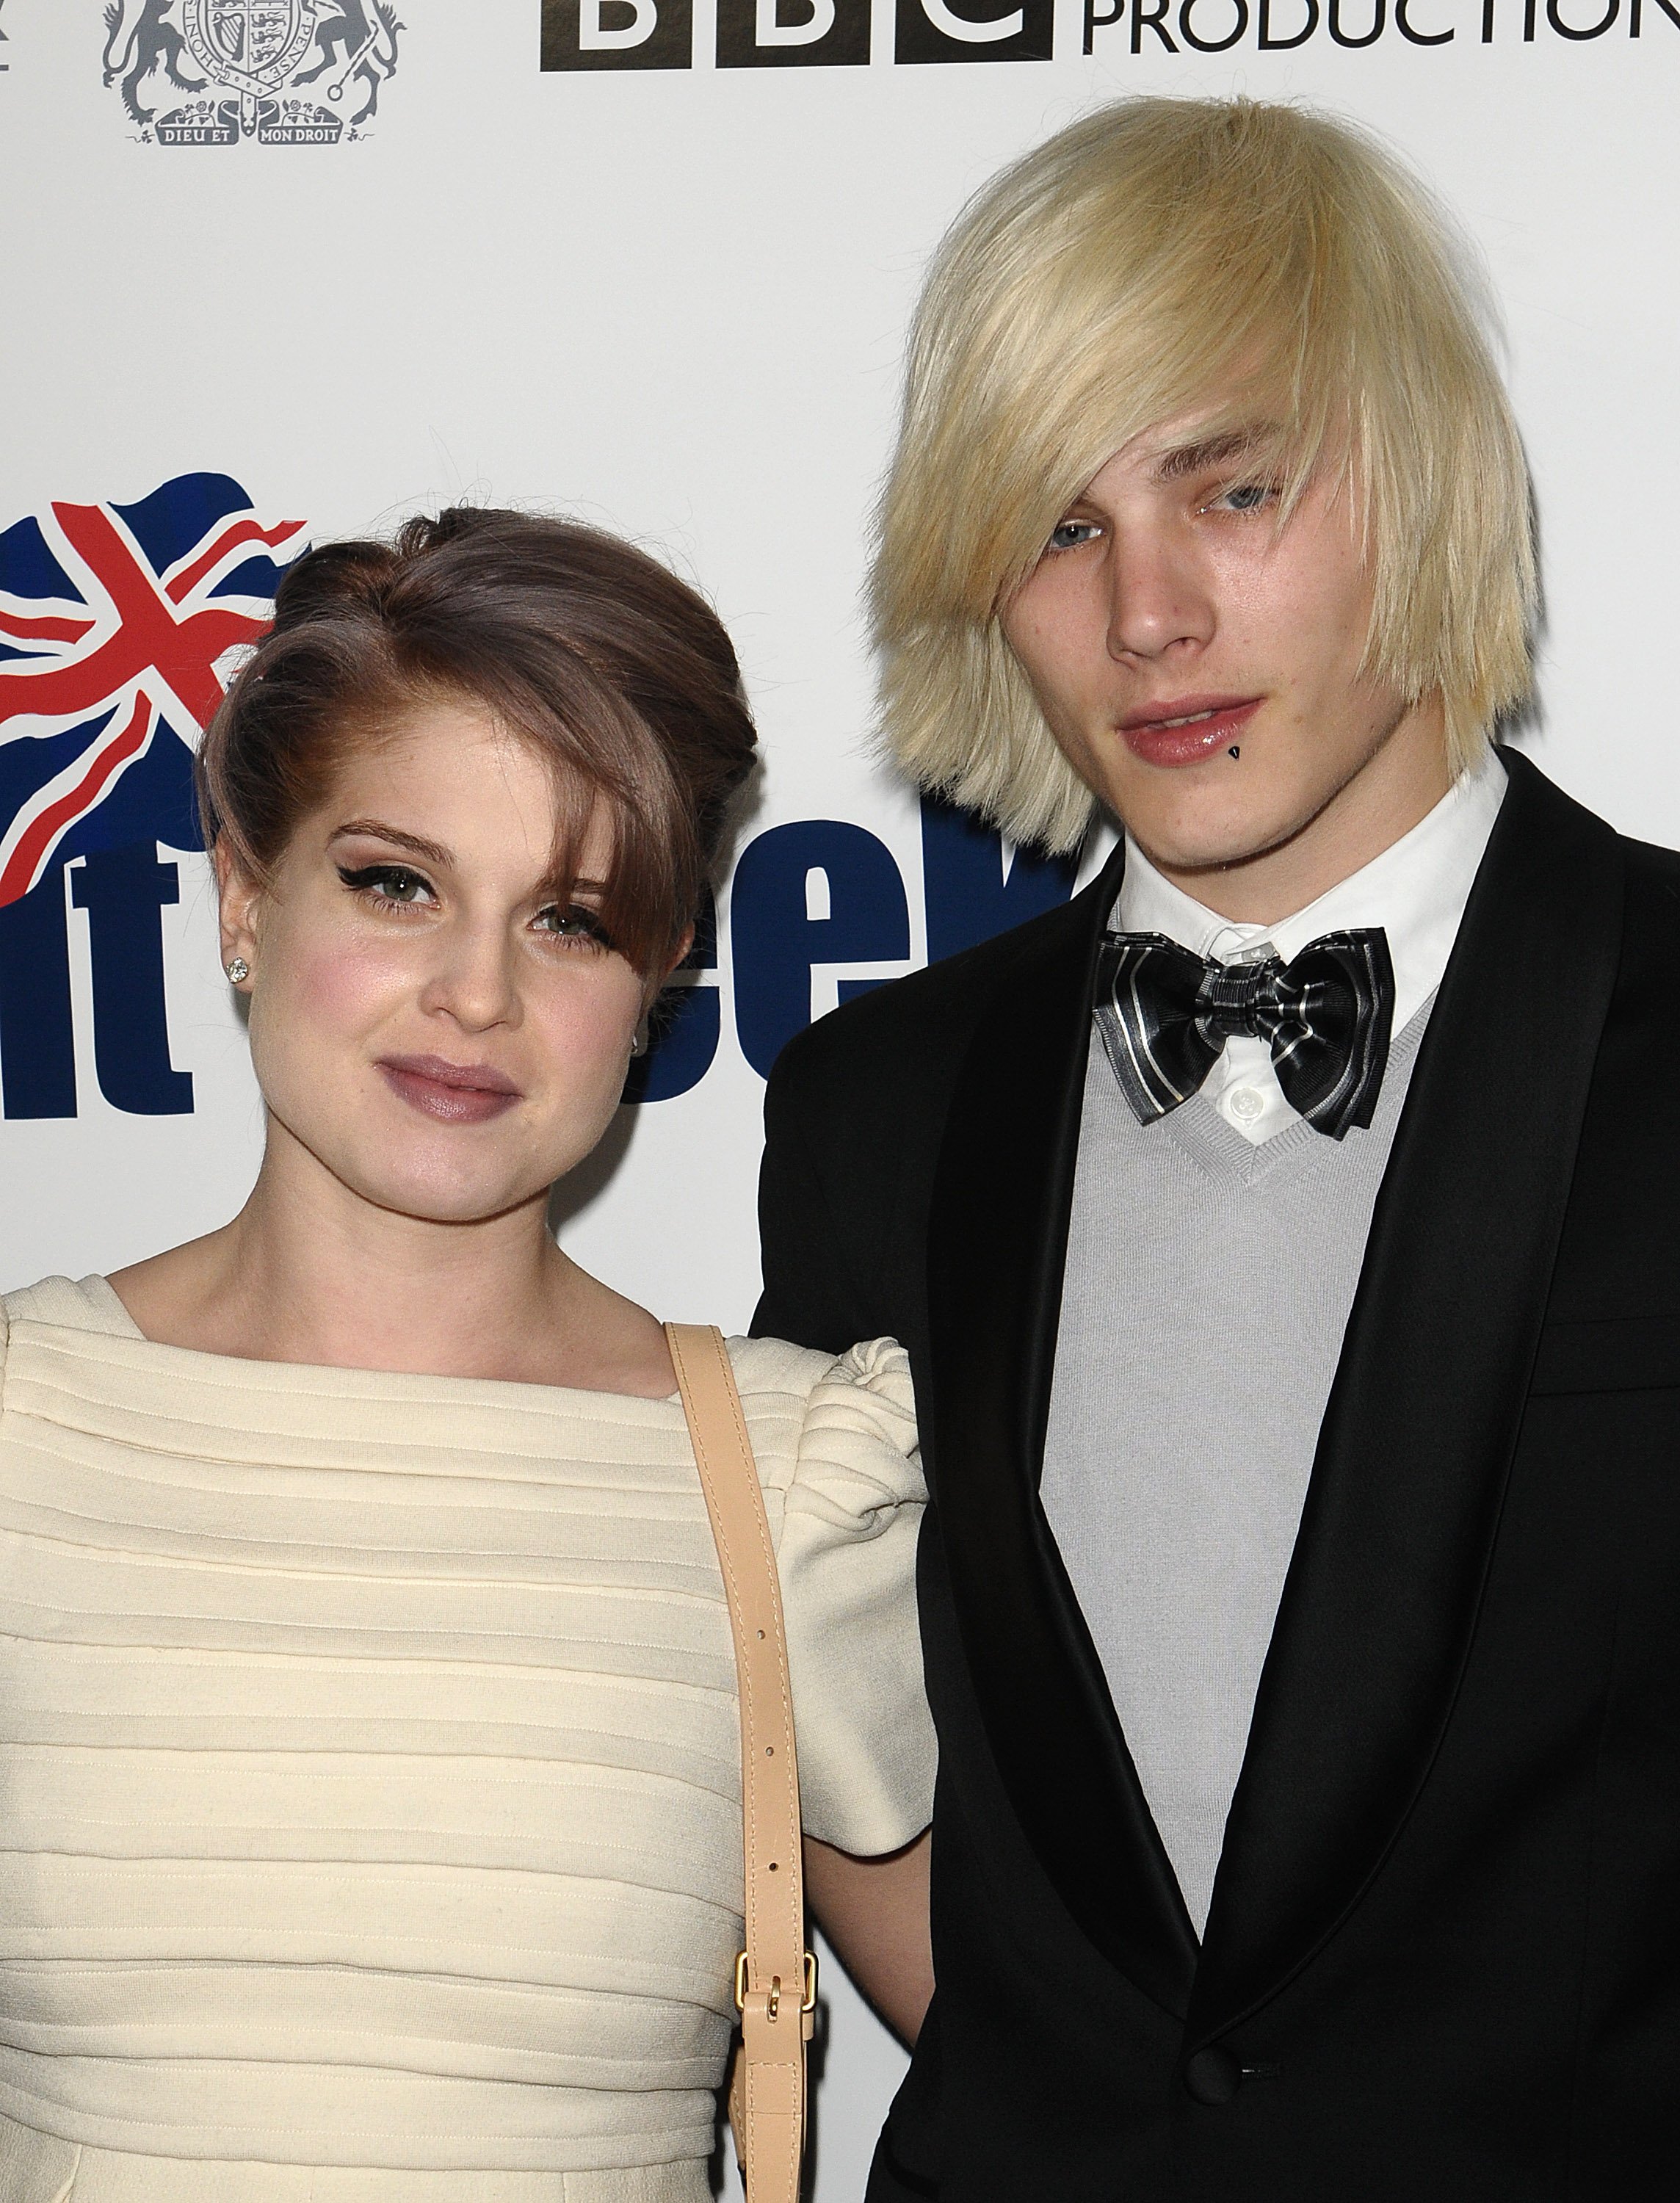 Kelly Osbourne and Luke Worrall at the BritWeek champagne launch red carpet event at the British Consul General's residence on April 20, 2010 in Los Angeles, California. | Source: Getty Images